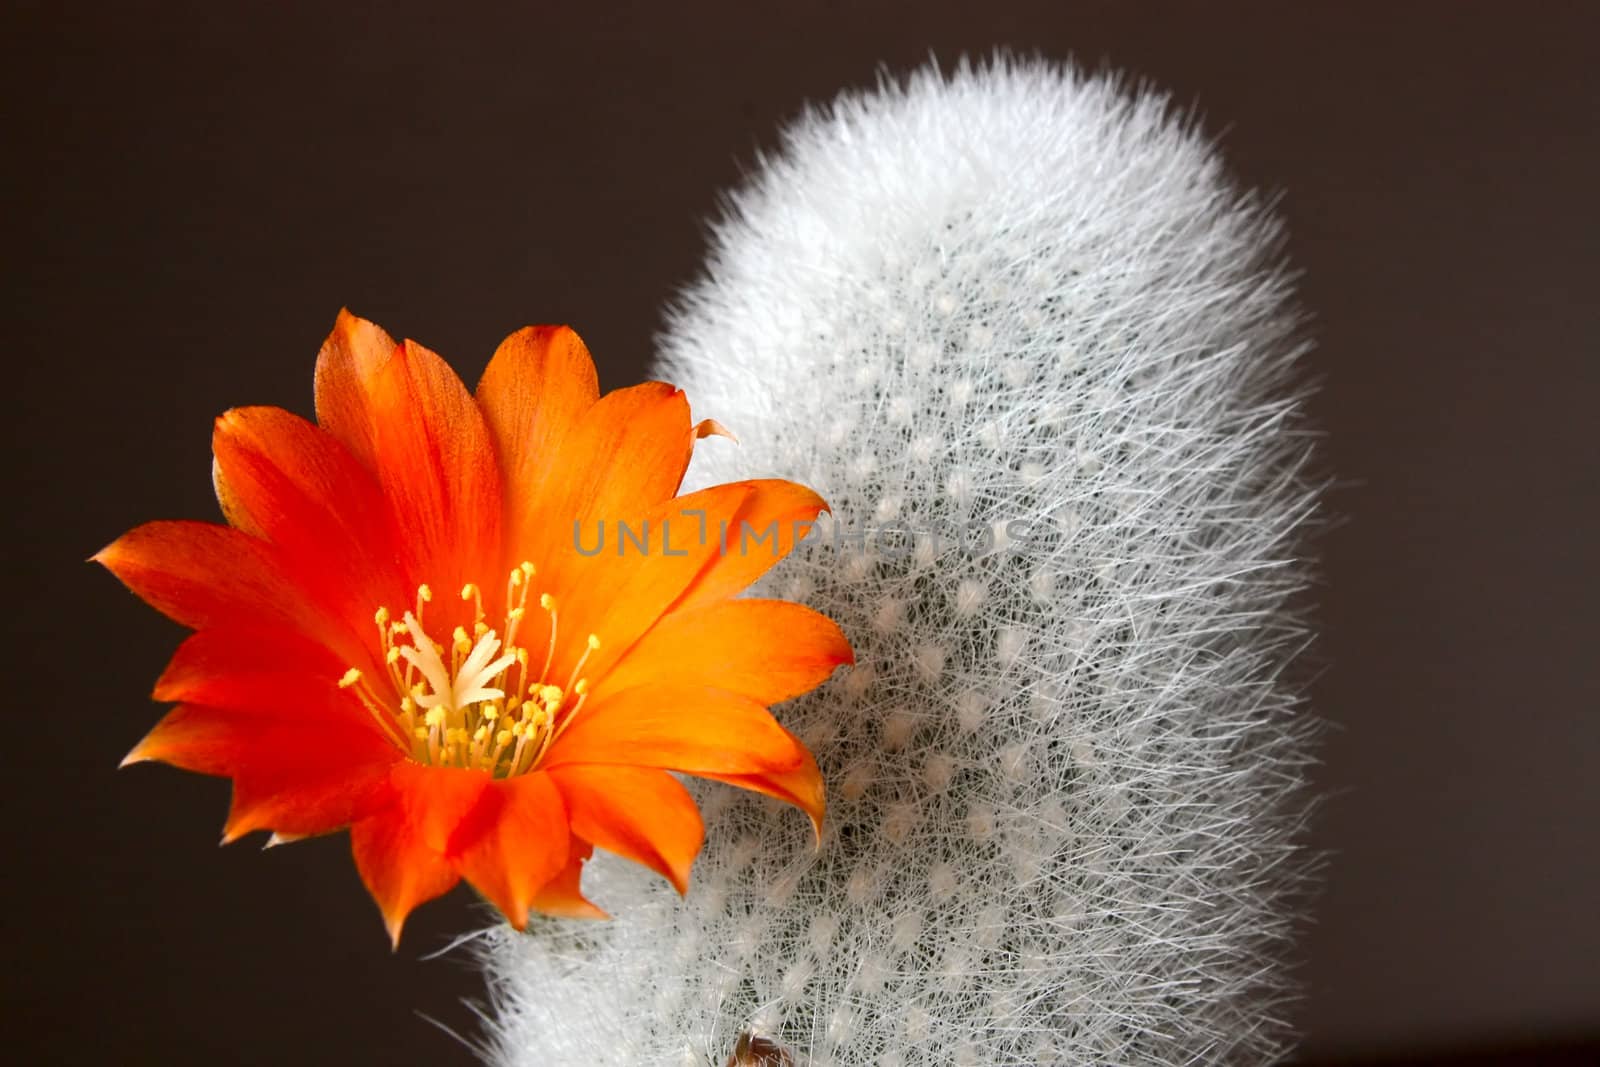 Blooming cactus on dark background (Aylostera).An image with shallow depth of field.